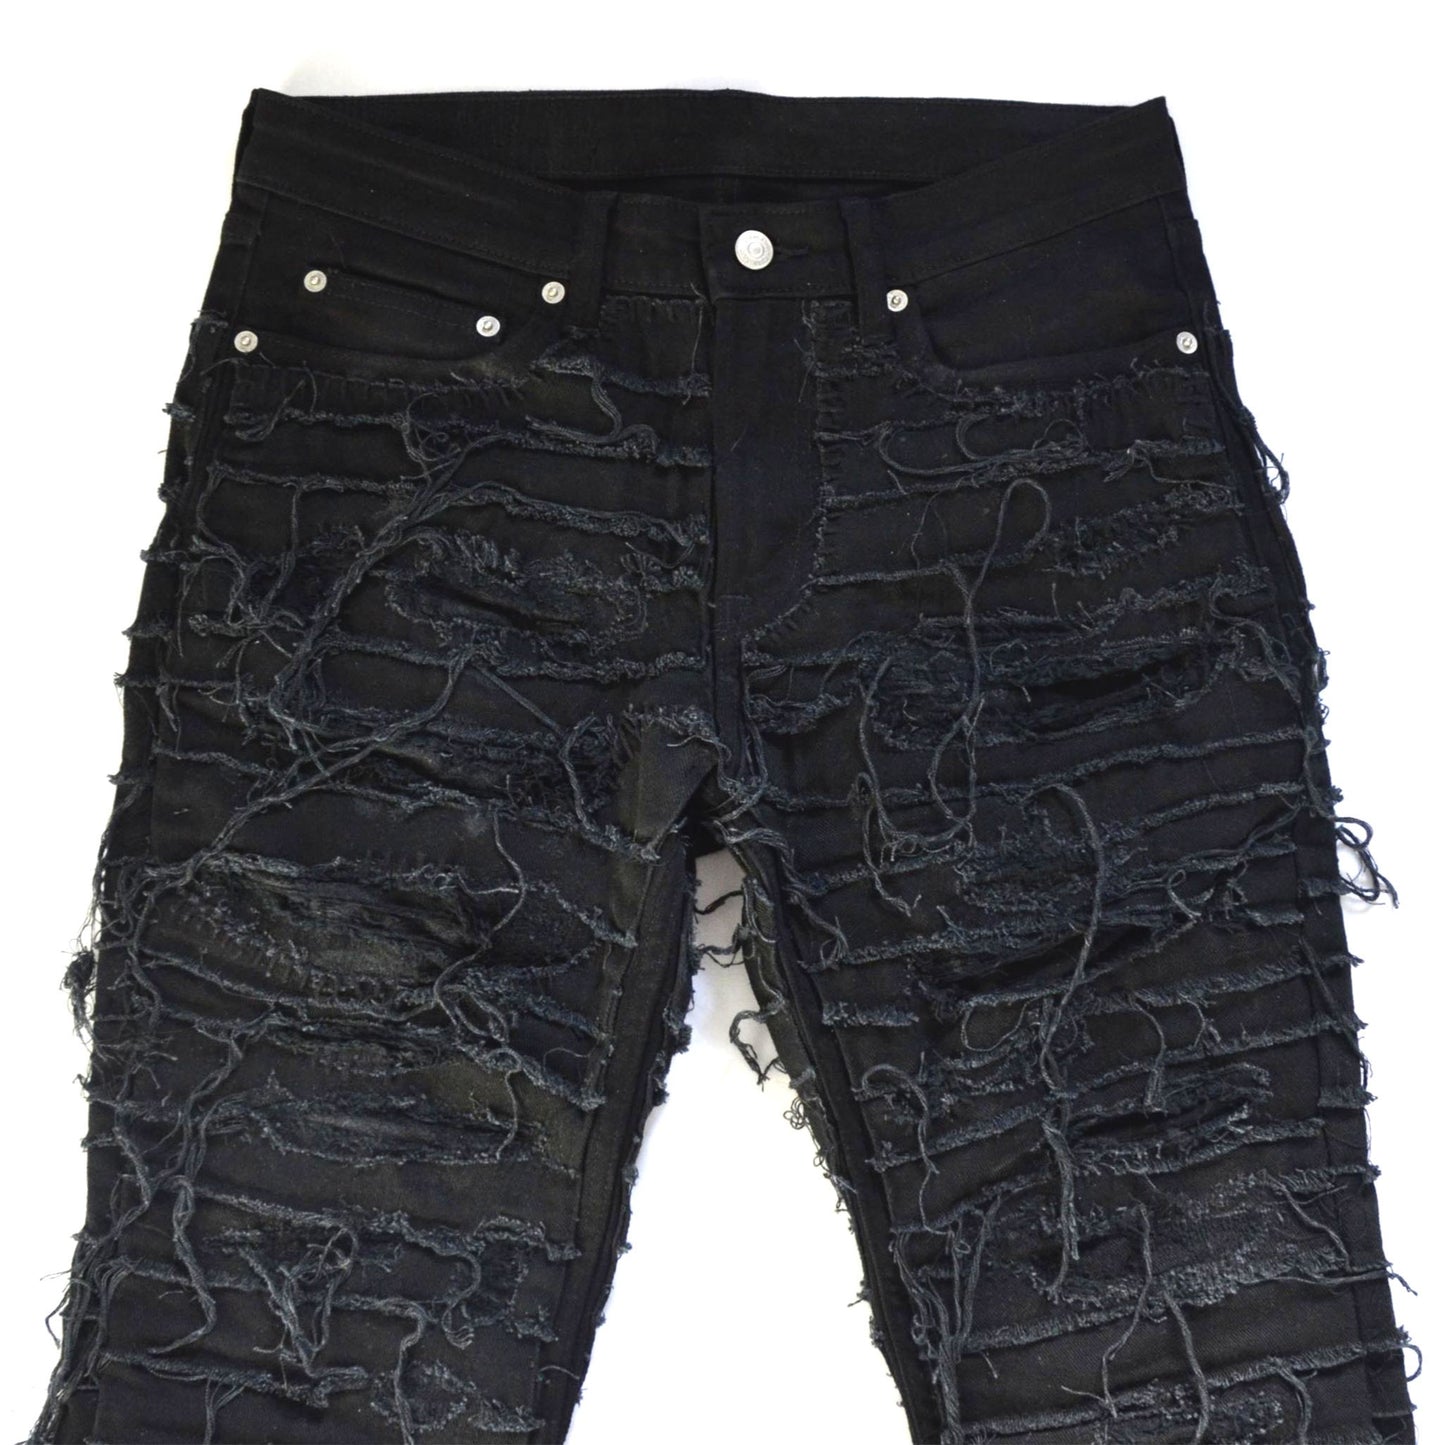 Distressed pants. Distressed jeans. Handmade heavy distressing on pants.